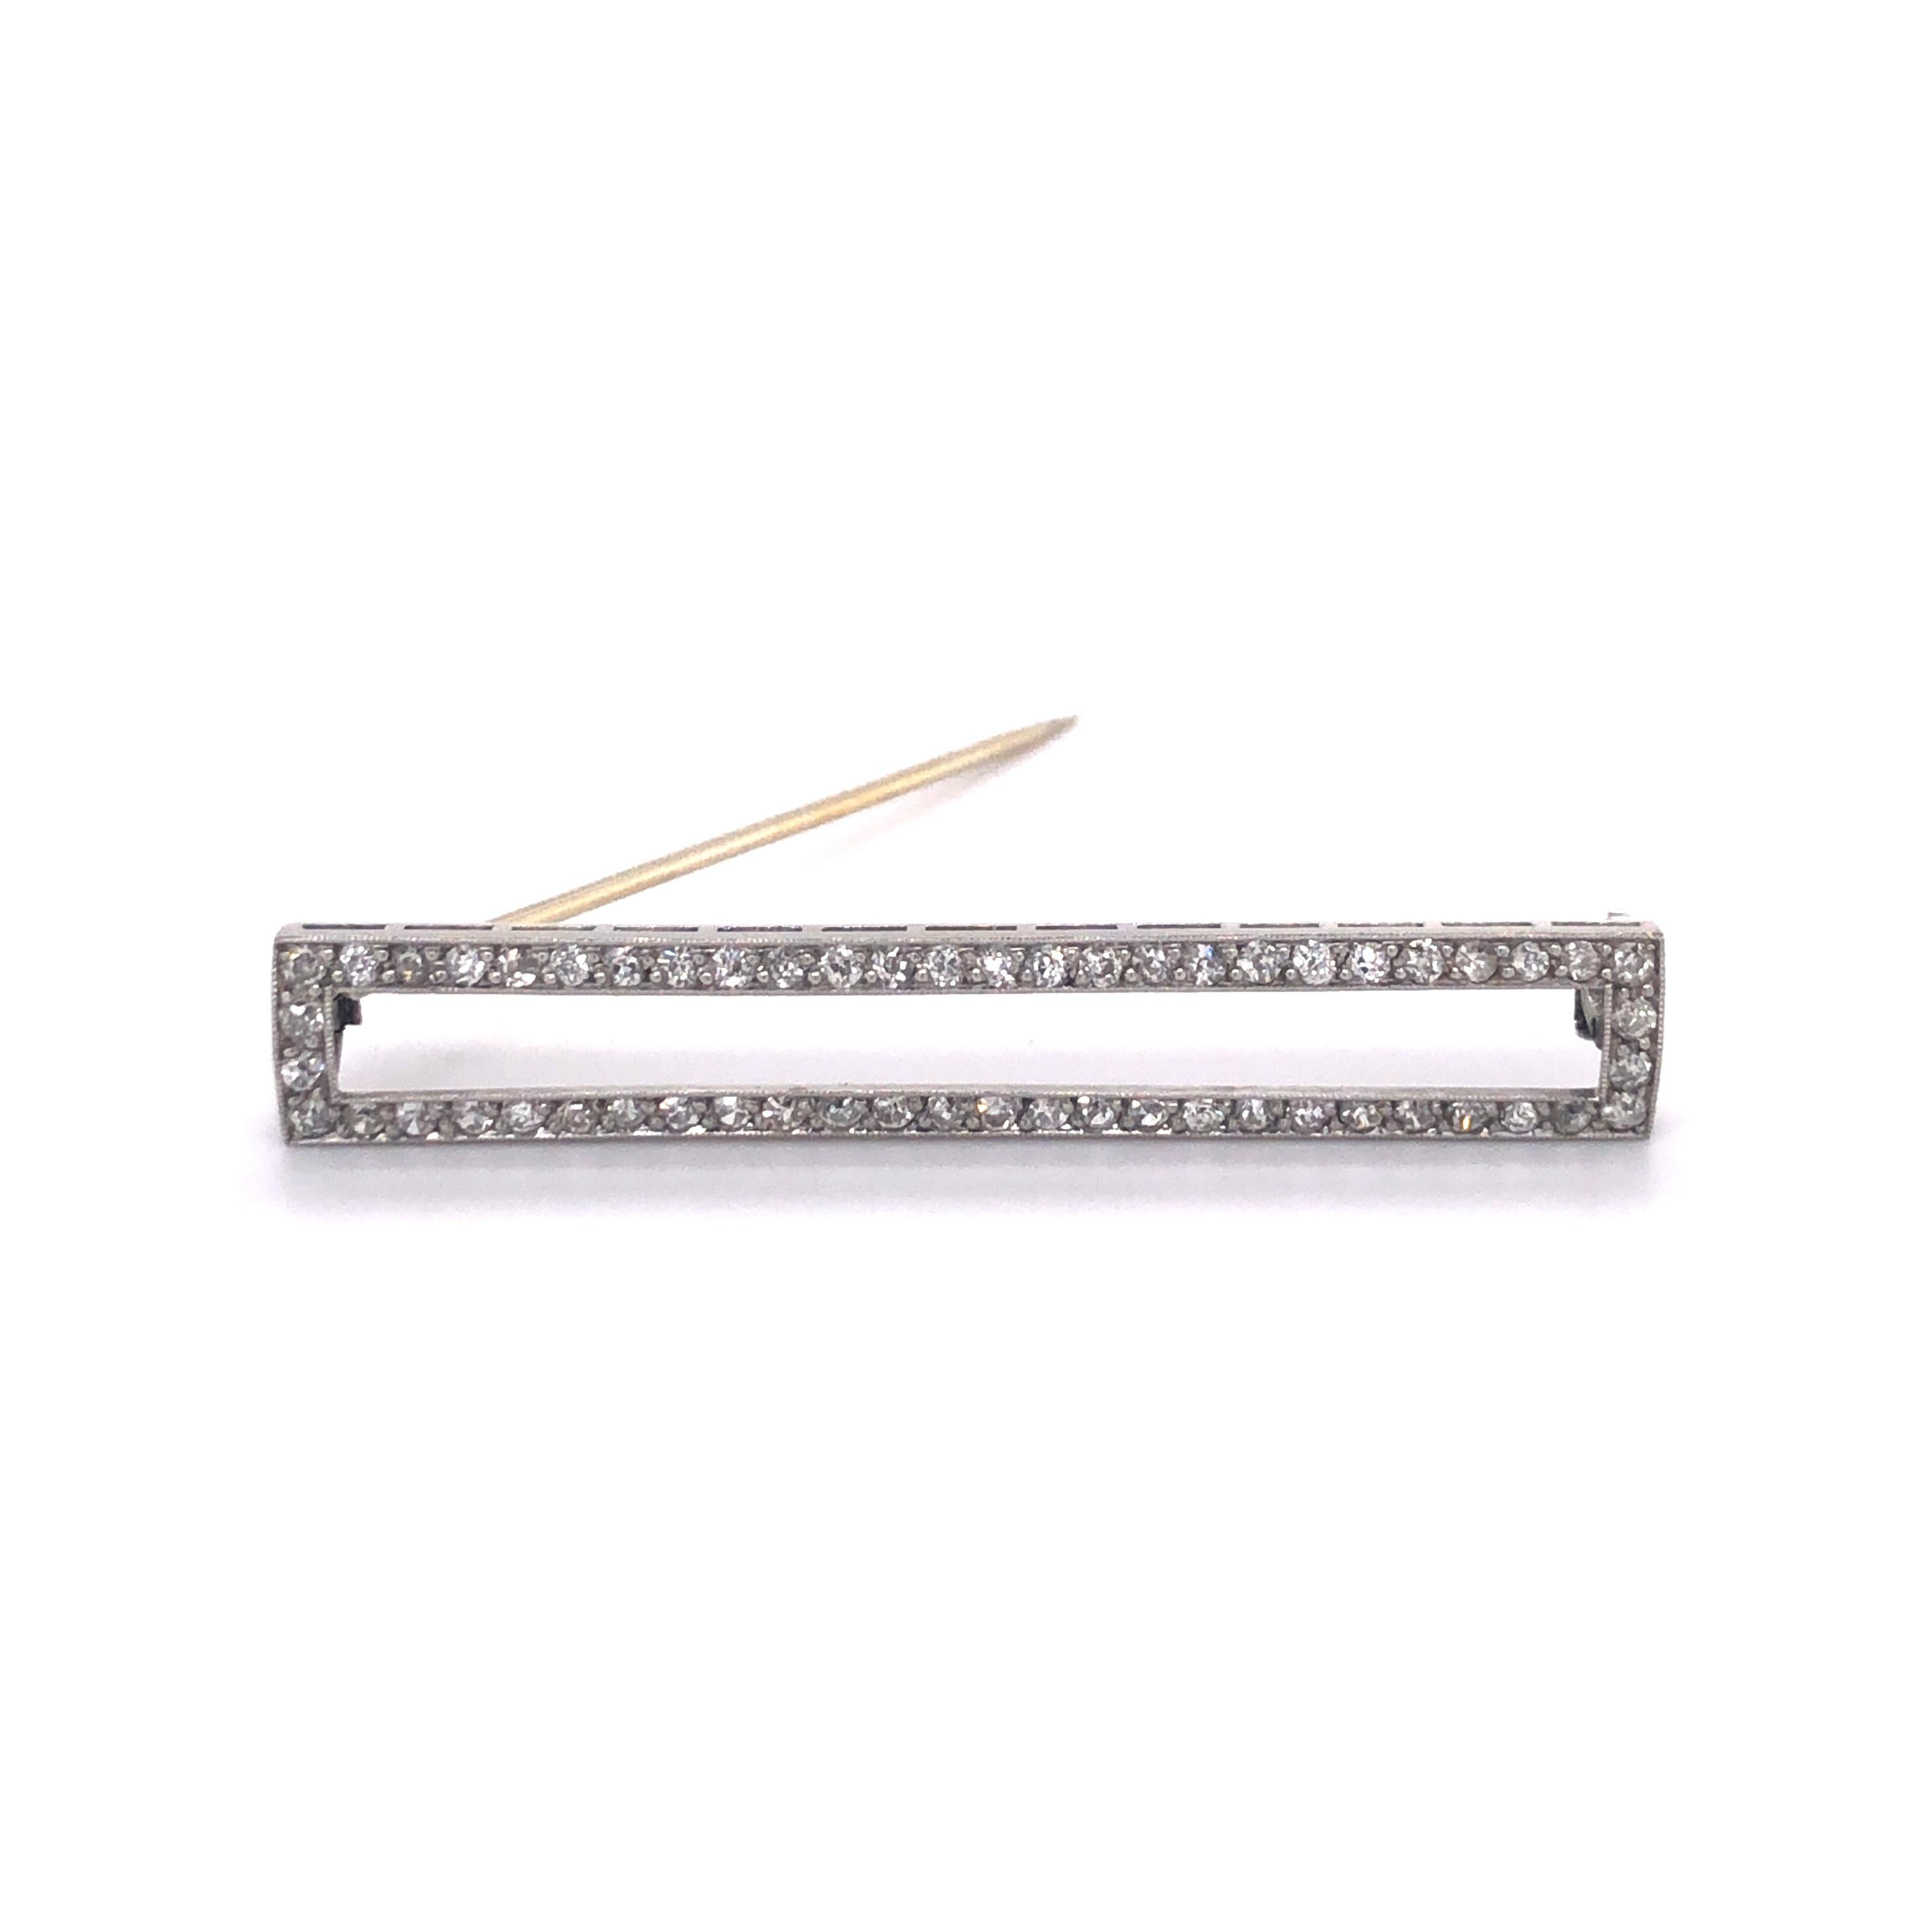 This beautifully handcrafted Belle Époque brooch is set with 56 old single cut diamonds of H/I colour and vs/si clarity, total weight approximately 0.80 ct.
Due to the use of platinum for the rectangular shaped setting, the brooch is both extremely